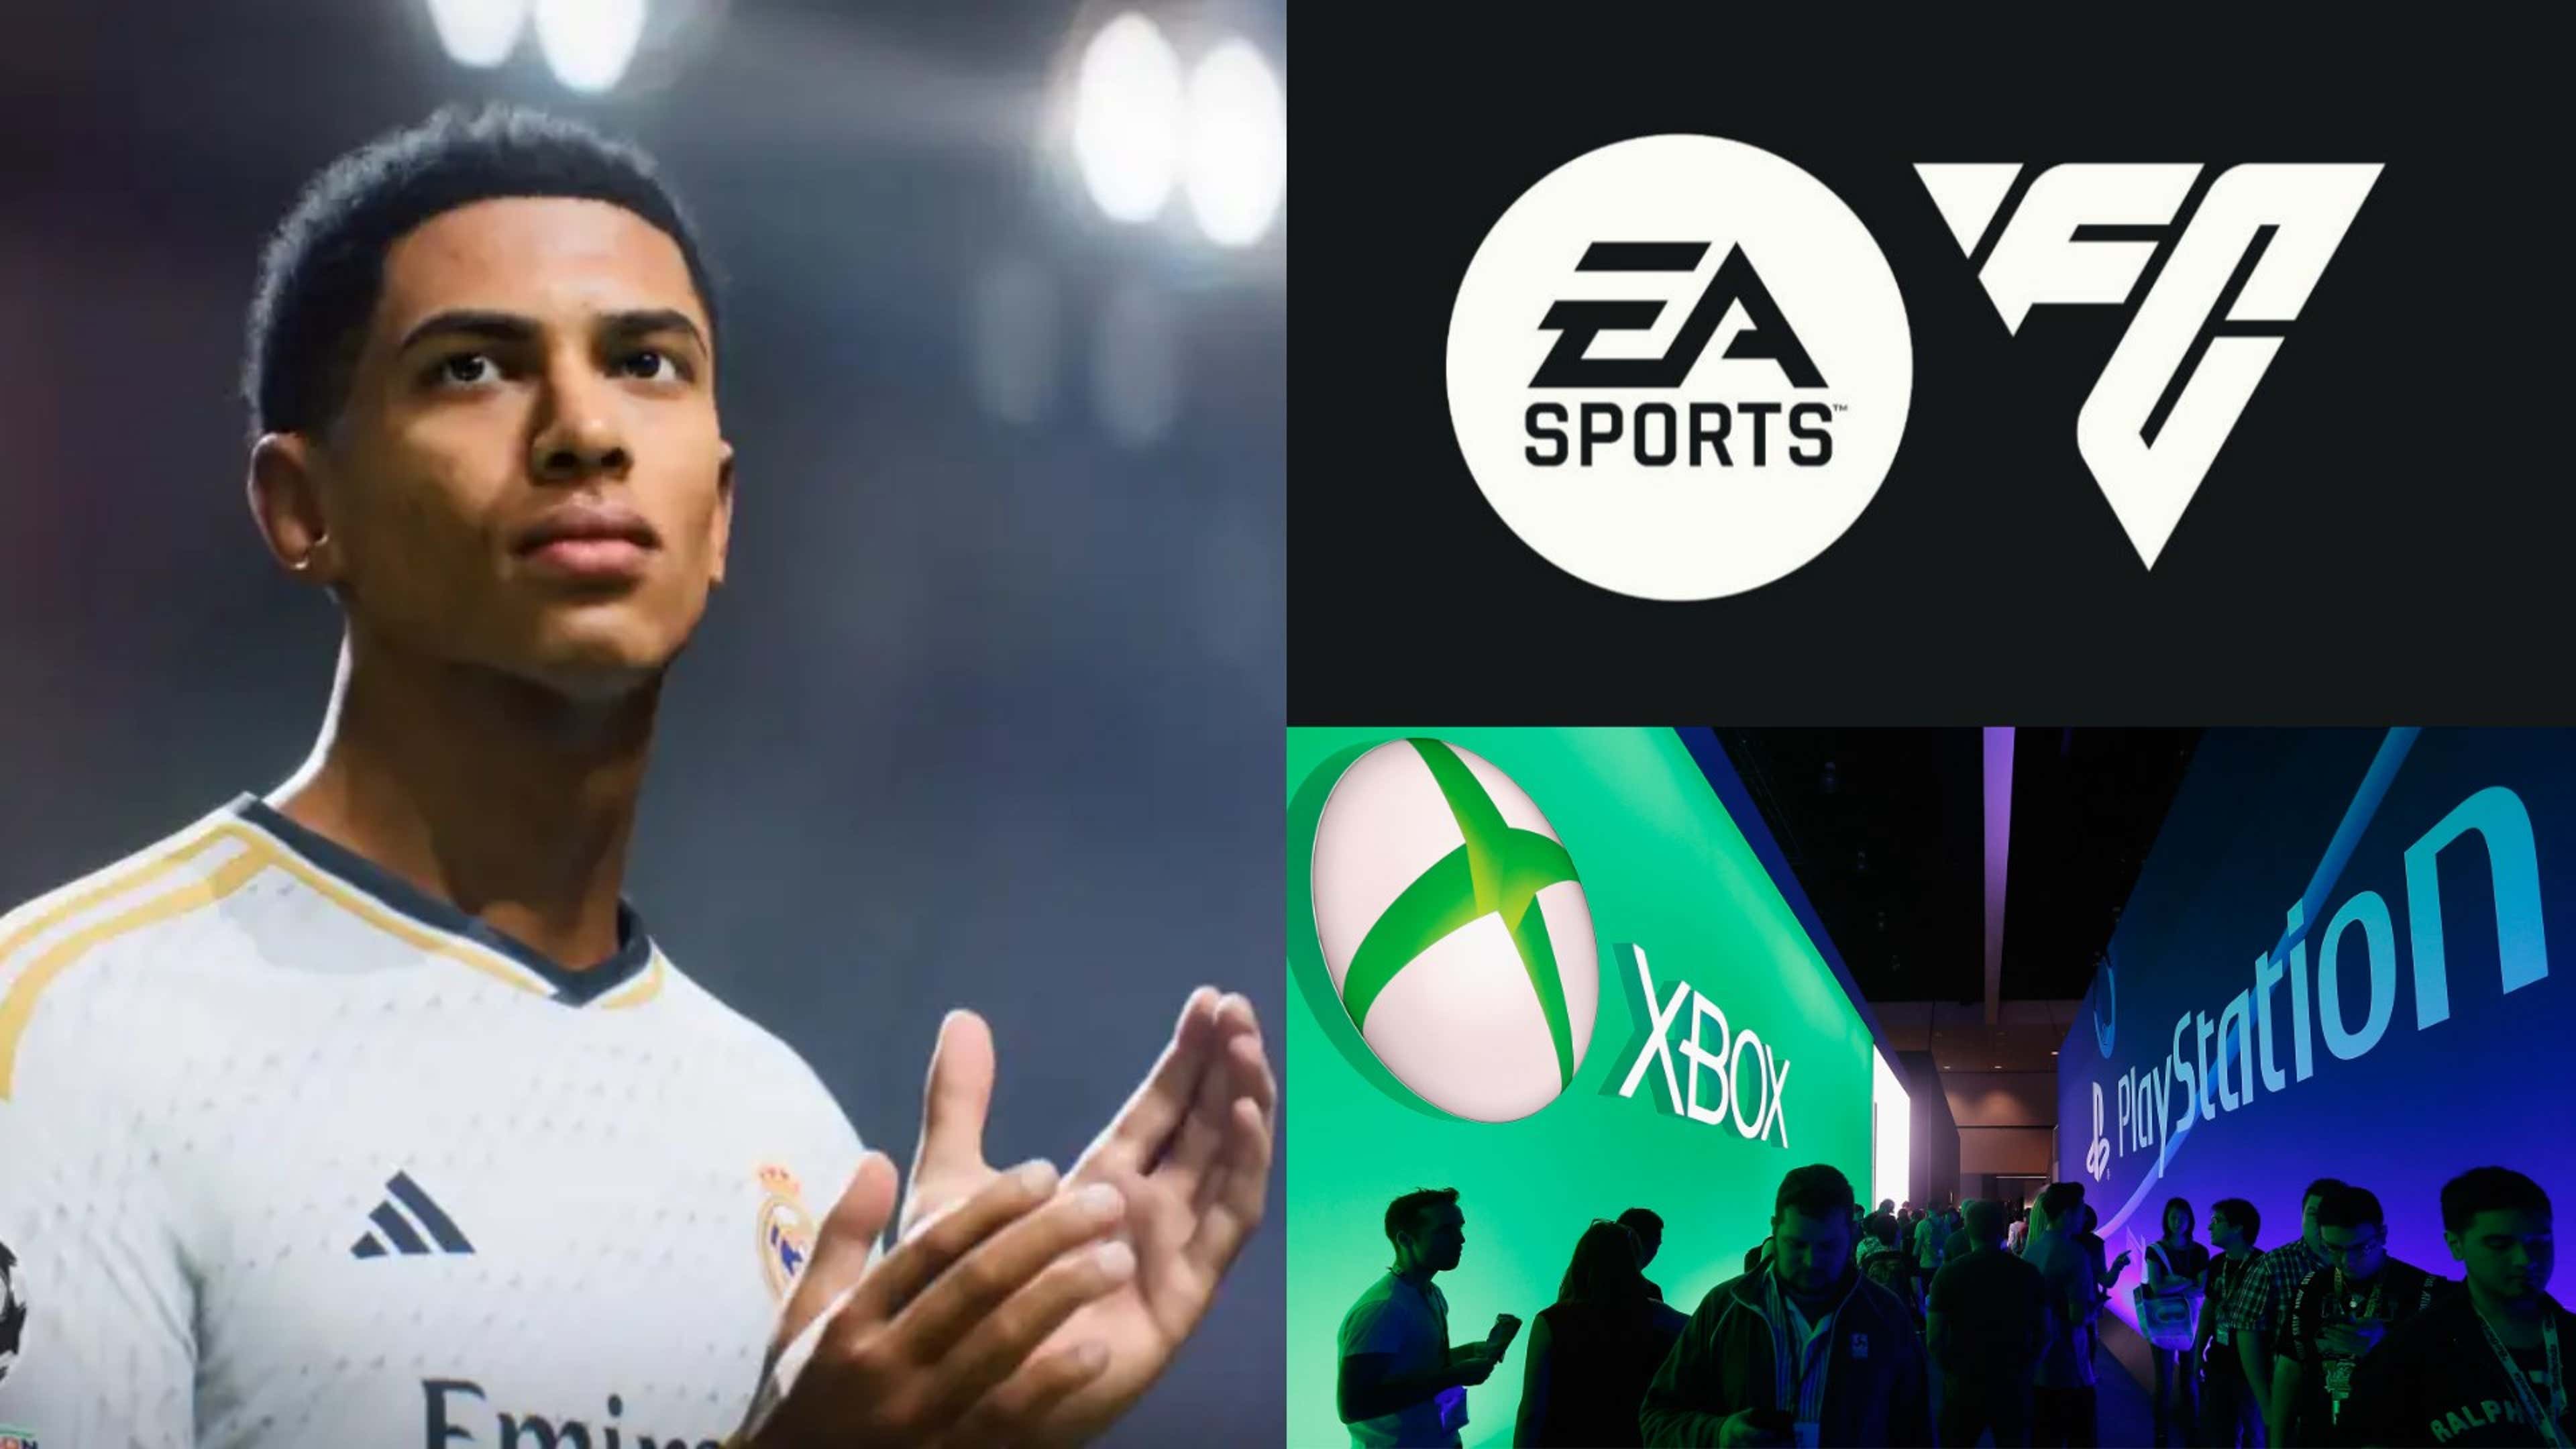 Does FIFA 23 have a demo? How to download EA Play trial free